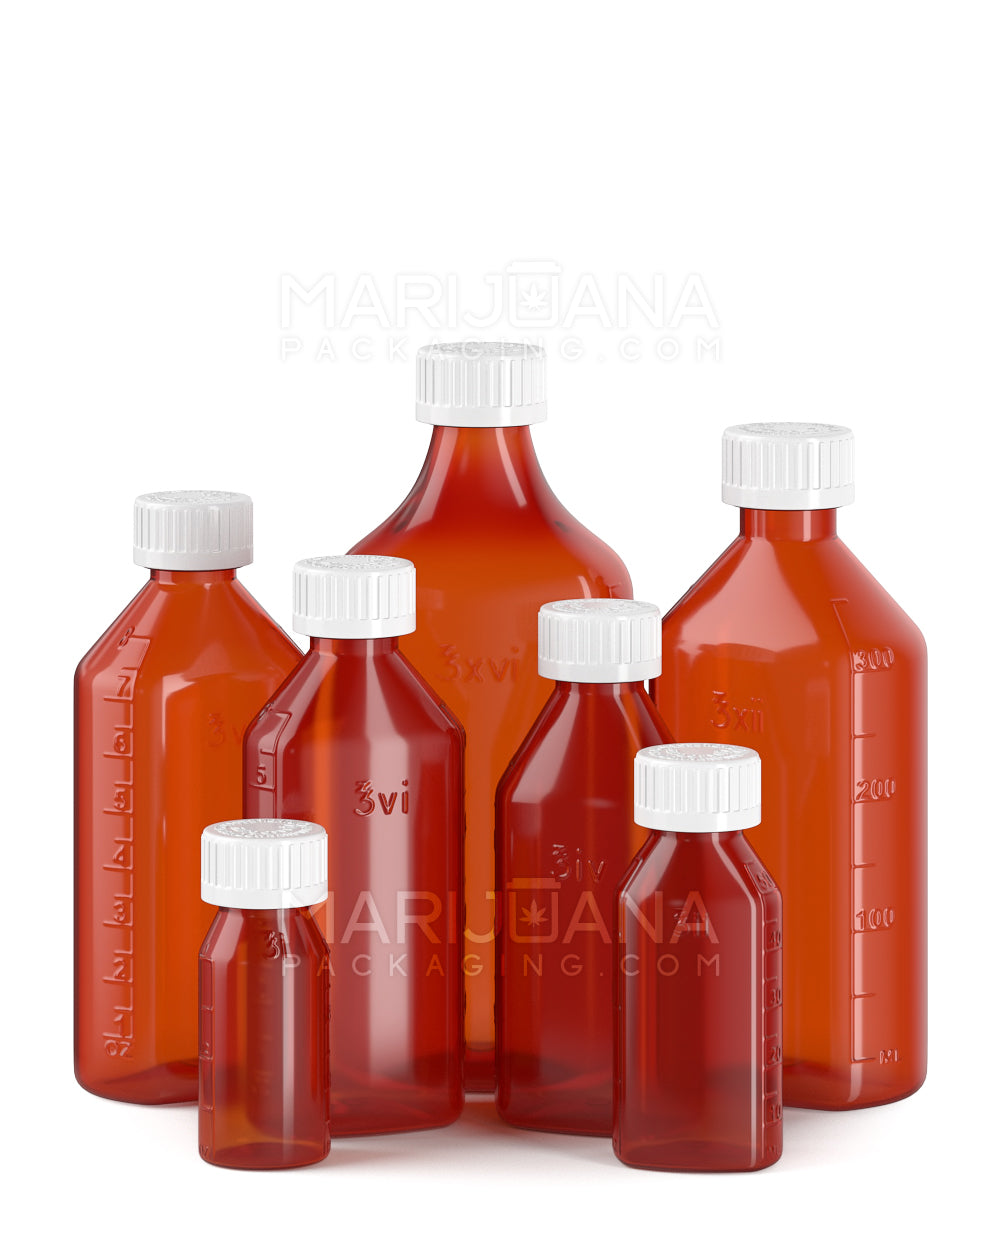 Child Resistant | Push Down & Turn Plastic Syrup Bottles w/ Oral Adapters | 4oz - Amber - 200 Count - 6